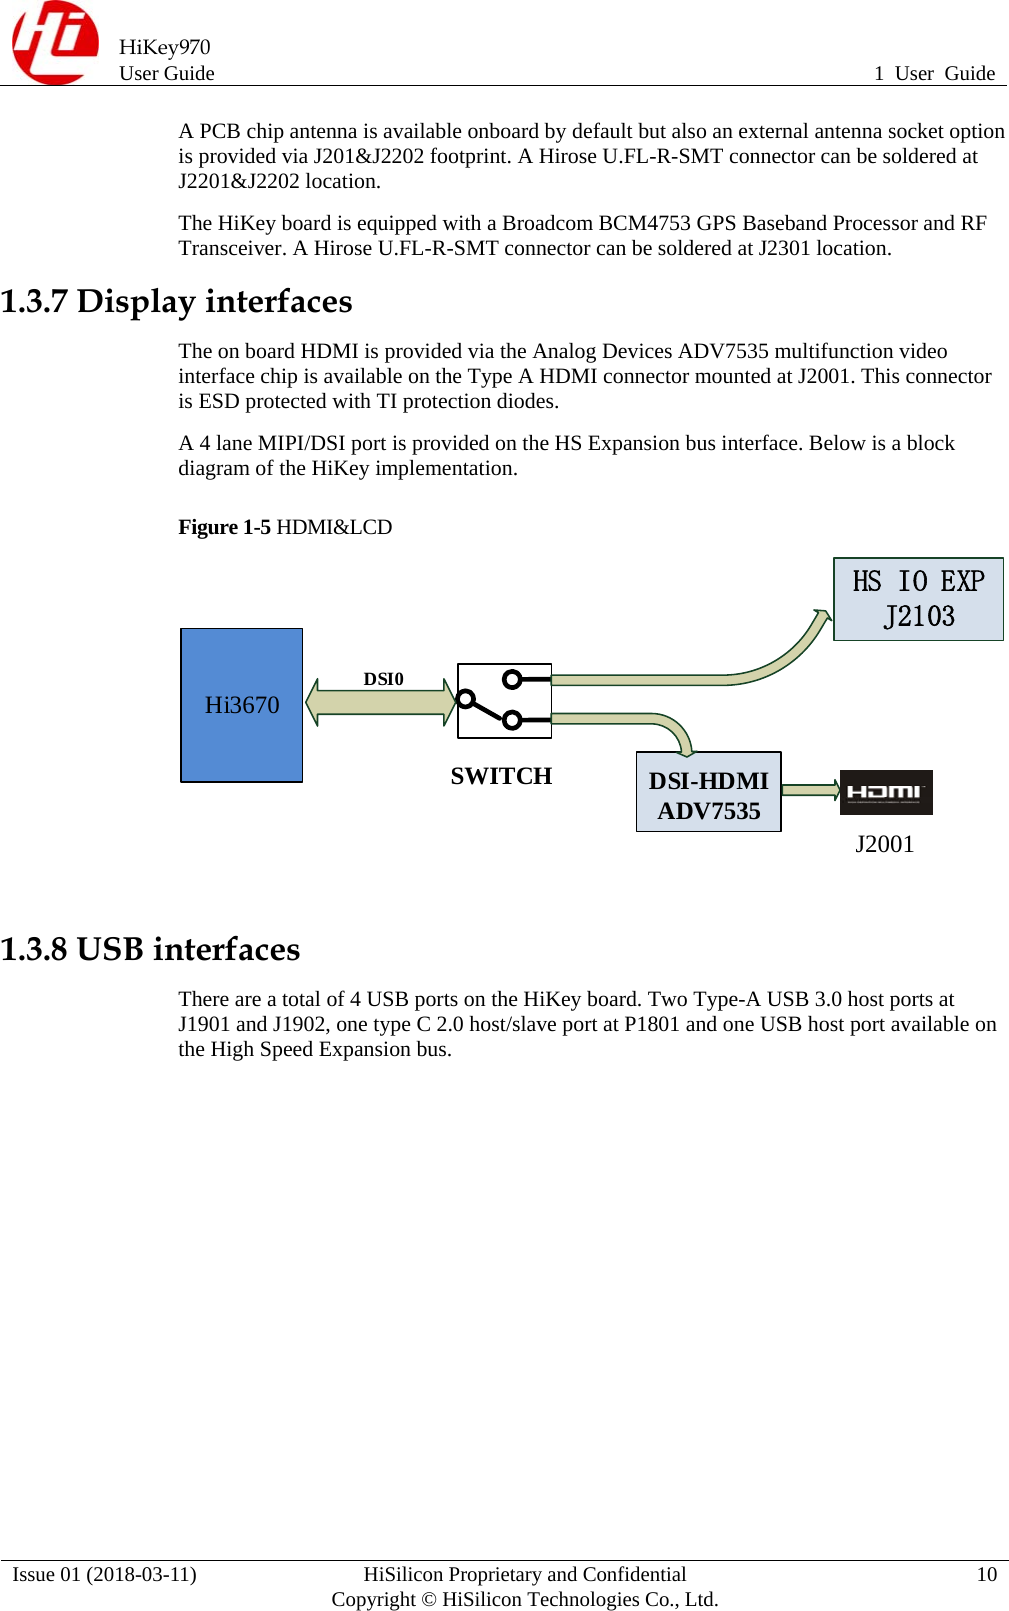  HiKey970 User Guide  1 User Guide Issue 01 (2018-03-11)  HiSilicon Proprietary and Confidential          Copyright © HiSilicon Technologies Co., Ltd.  10 A PCB chip antenna is available onboard by default but also an external antenna socket option is provided via J201&amp;J2202 footprint. A Hirose U.FL-R-SMT connector can be soldered at J2201&amp;J2202 location. The HiKey board is equipped with a Broadcom BCM4753 GPS Baseband Processor and RF Transceiver. A Hirose U.FL-R-SMT connector can be soldered at J2301 location. 1.3.7 Display interfaces   The on board HDMI is provided via the Analog Devices ADV7535 multifunction video interface chip is available on the Type A HDMI connector mounted at J2001. This connector is ESD protected with TI protection diodes. A 4 lane MIPI/DSI port is provided on the HS Expansion bus interface. Below is a block diagram of the HiKey implementation. Figure 1-5 HDMI&amp;LCD Hi3670DSI-HDMIADV7535HS IO EXPJ2103DSI0SWITCHJ2001  1.3.8 USB interfaces There are a total of 4 USB ports on the HiKey board. Two Type-A USB 3.0 host ports at J1901 and J1902, one type C 2.0 host/slave port at P1801 and one USB host port available on the High Speed Expansion bus.   